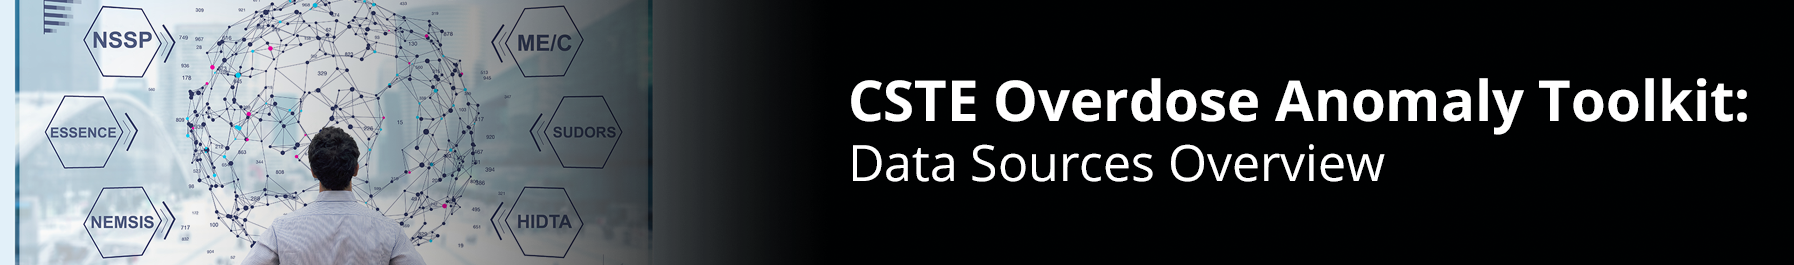 CSTE Overdose Anomaly Toolkit: Data Sources Overview